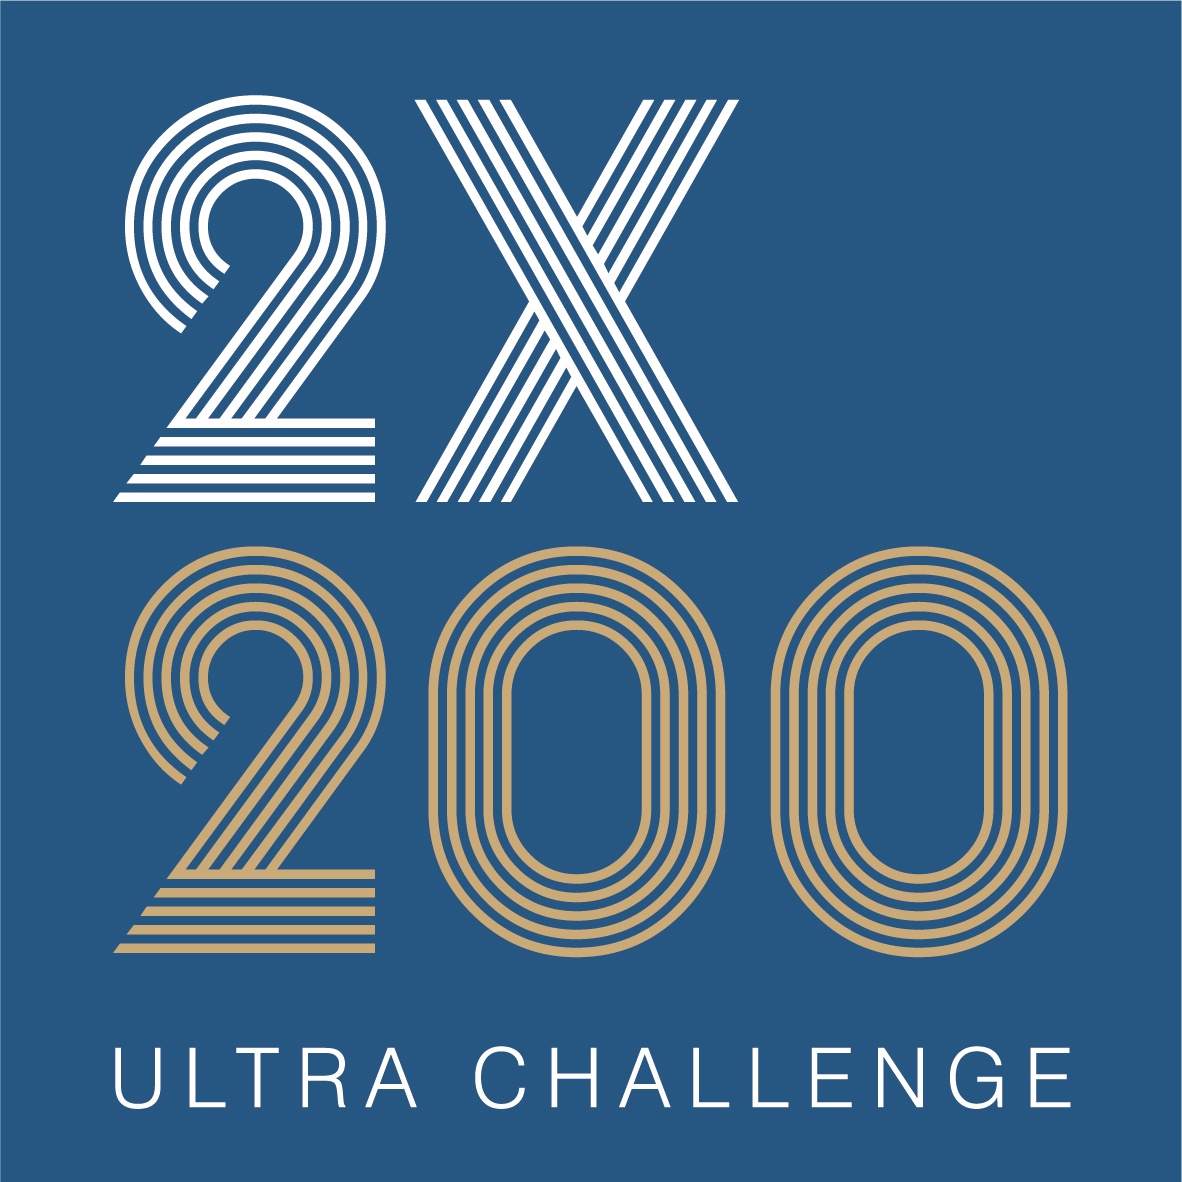 2x200 ultra challenge is open to registrations